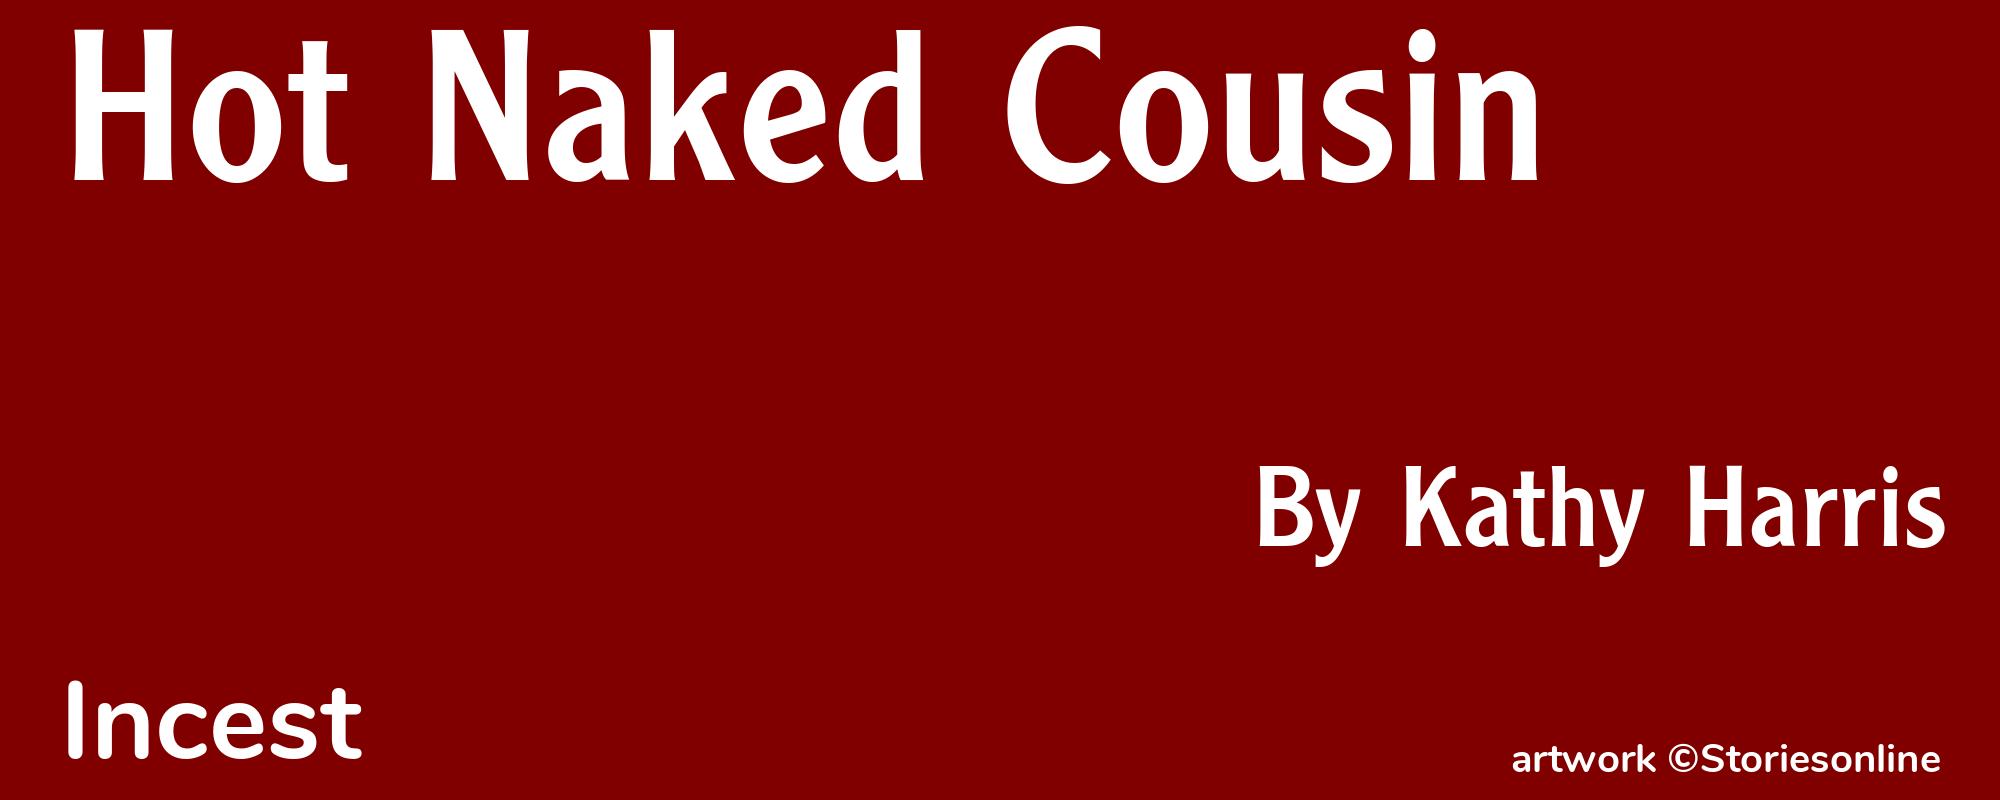 Hot Naked Cousin - Cover